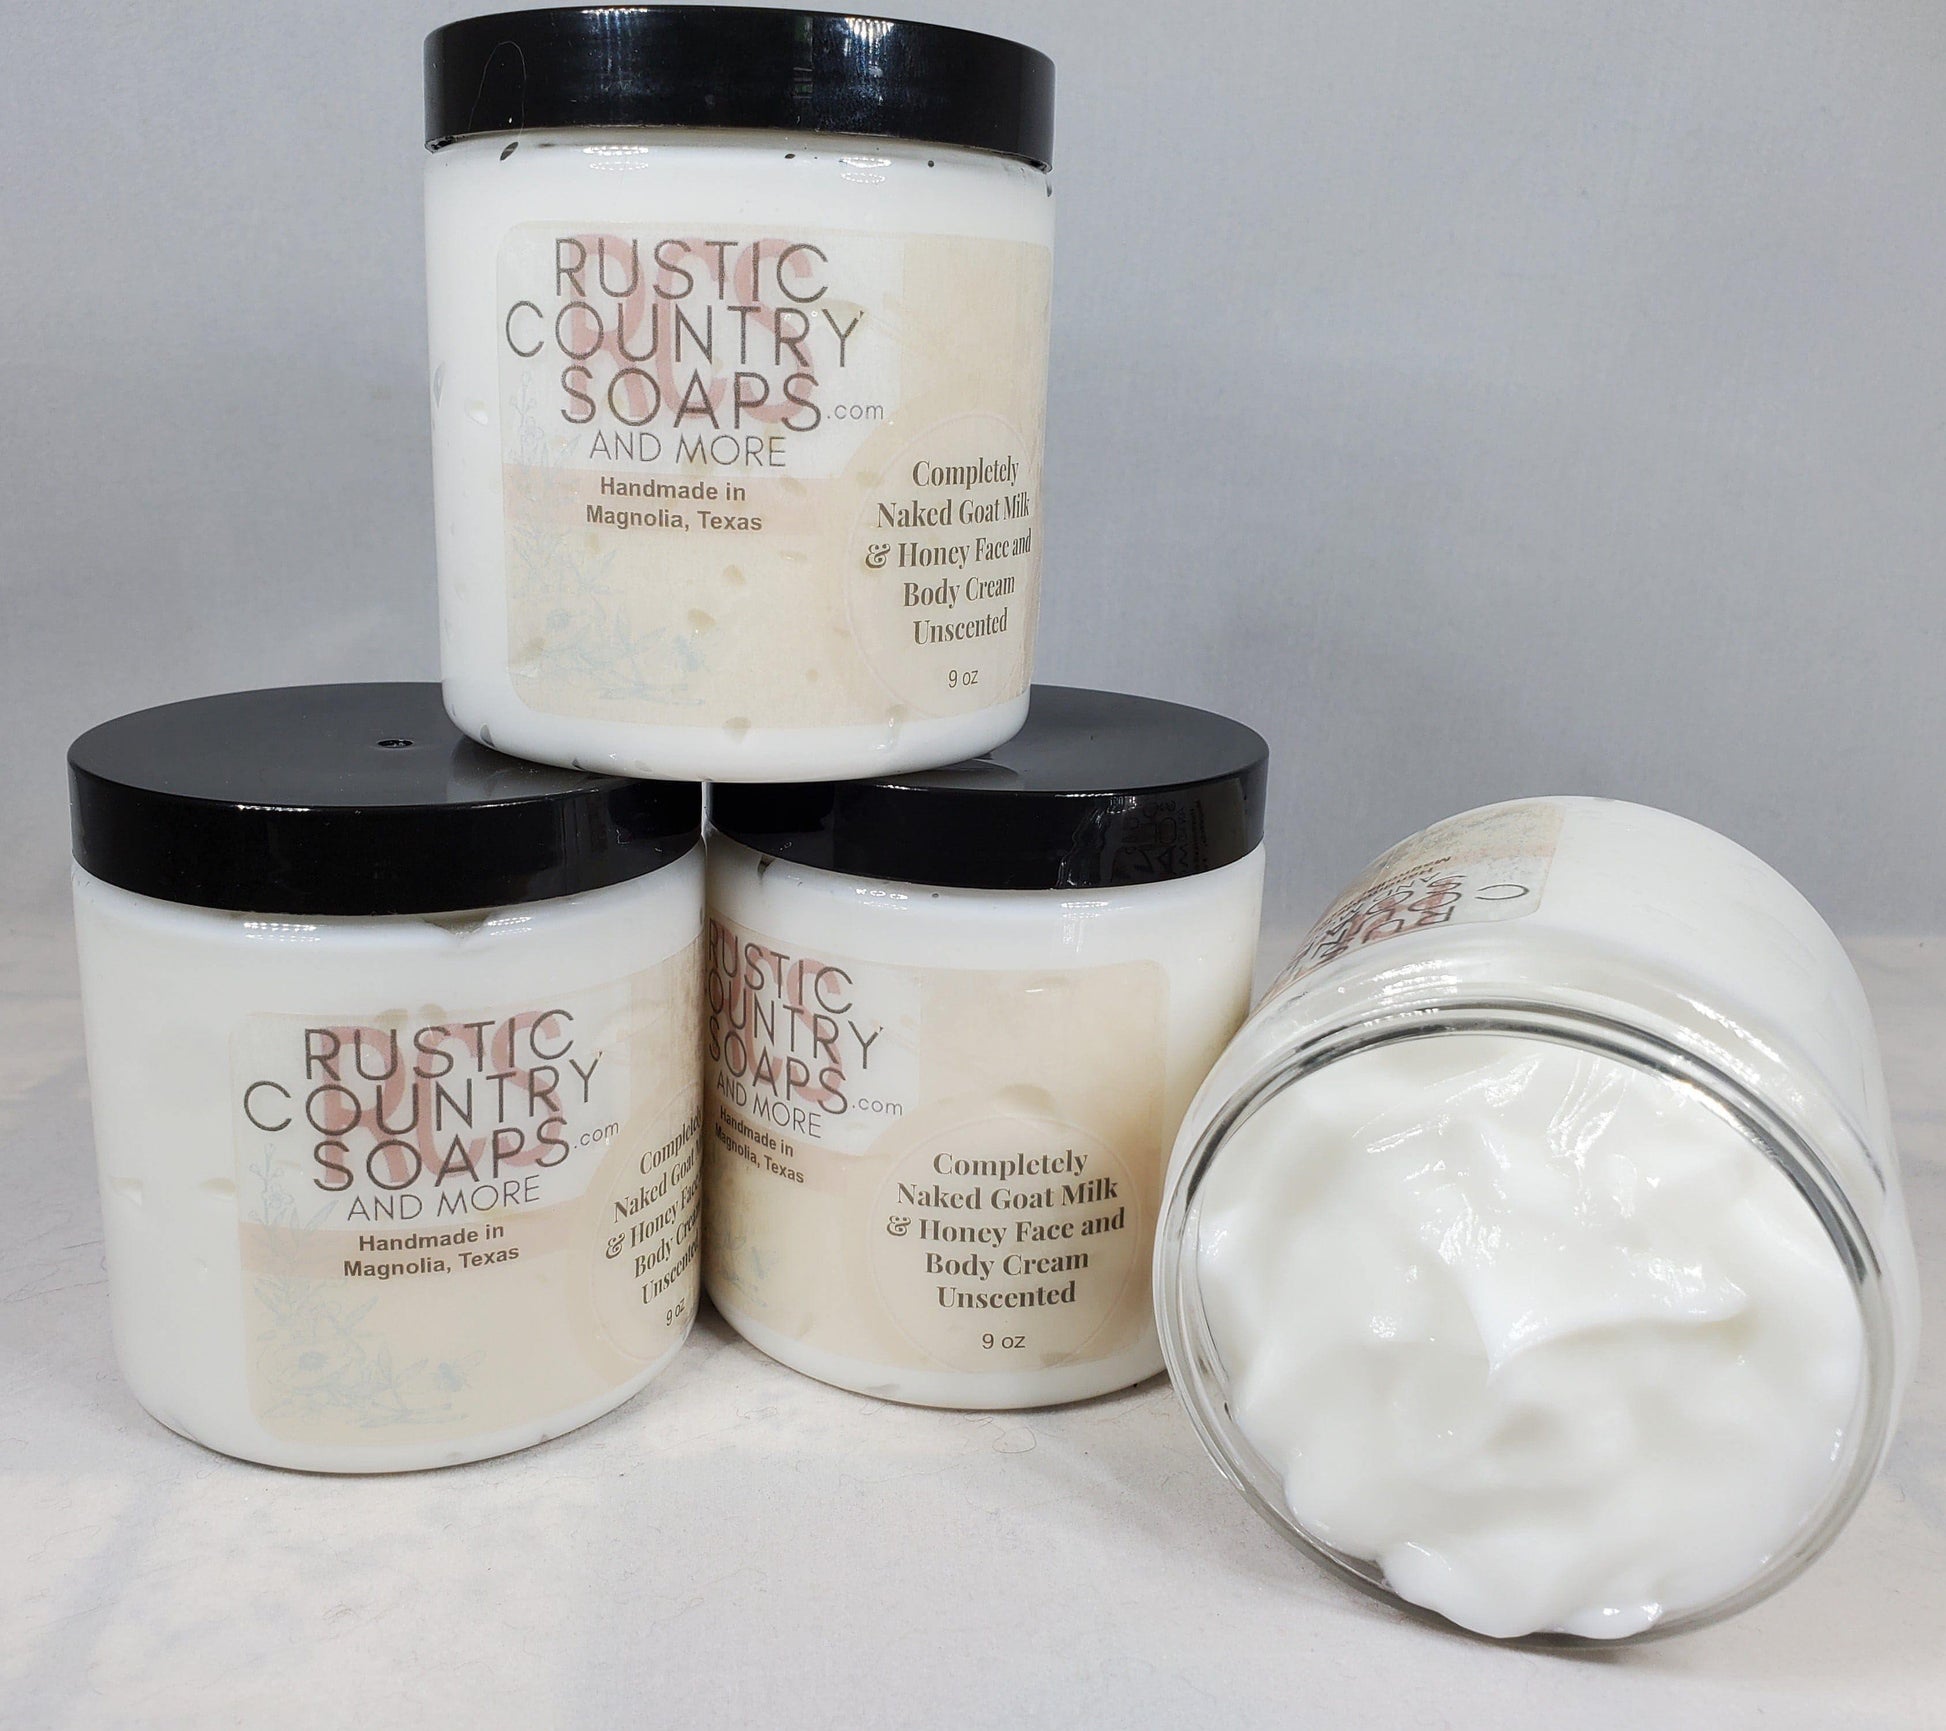 Completely Naked Goat Milk & Honey Face & Body Cream - Rustic Country Soaps & More